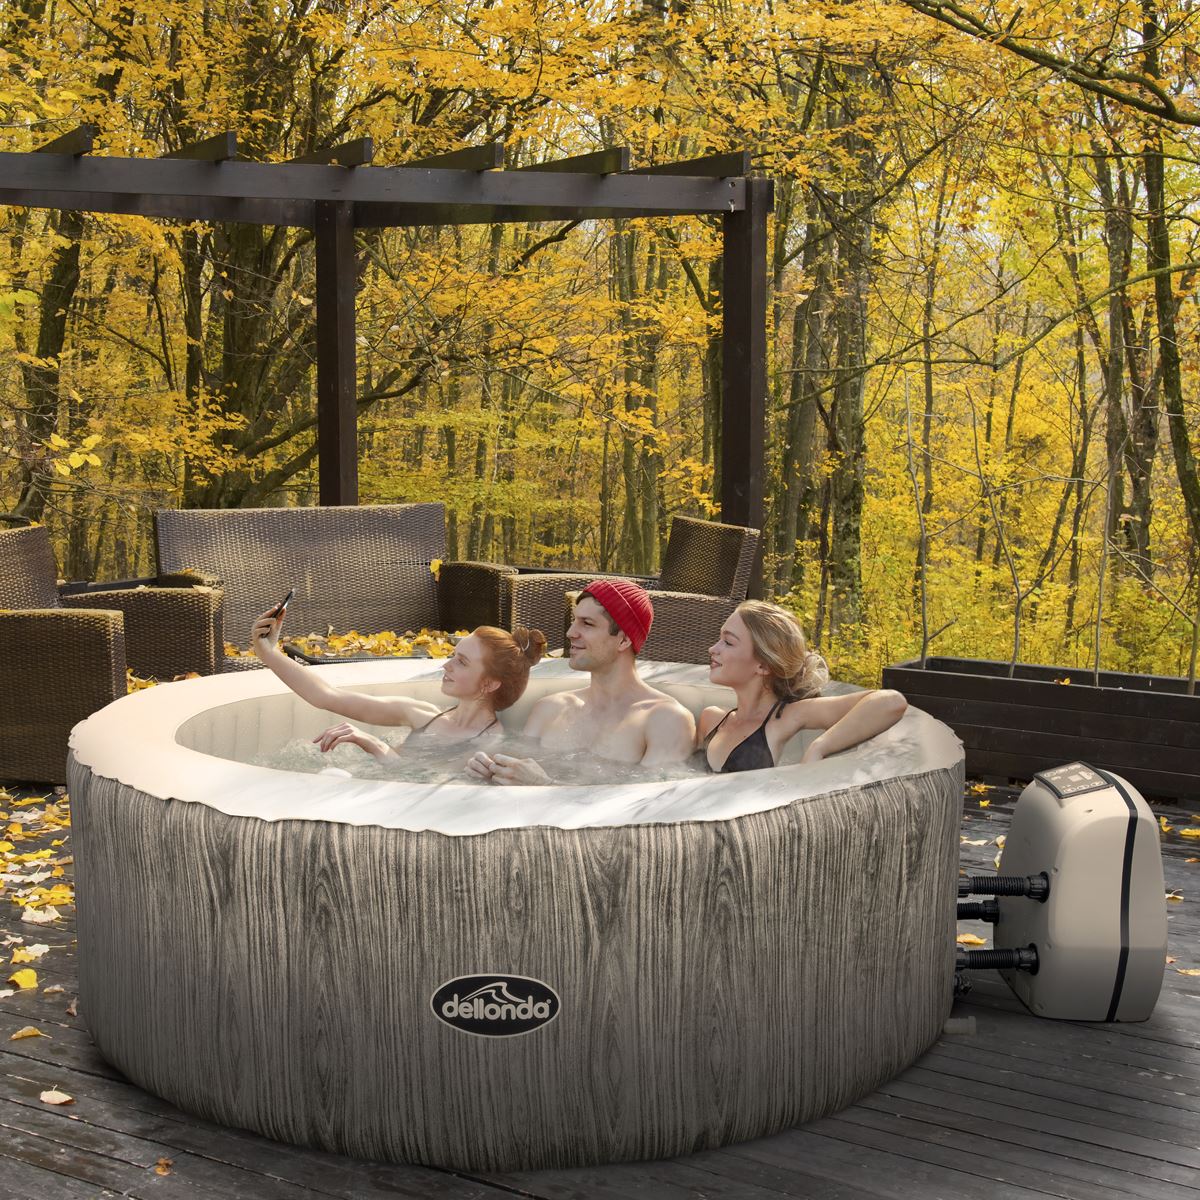 Dellonda 4-6 Person Inflatable Hot Tub Spa with Smart Pump - Wood Effect